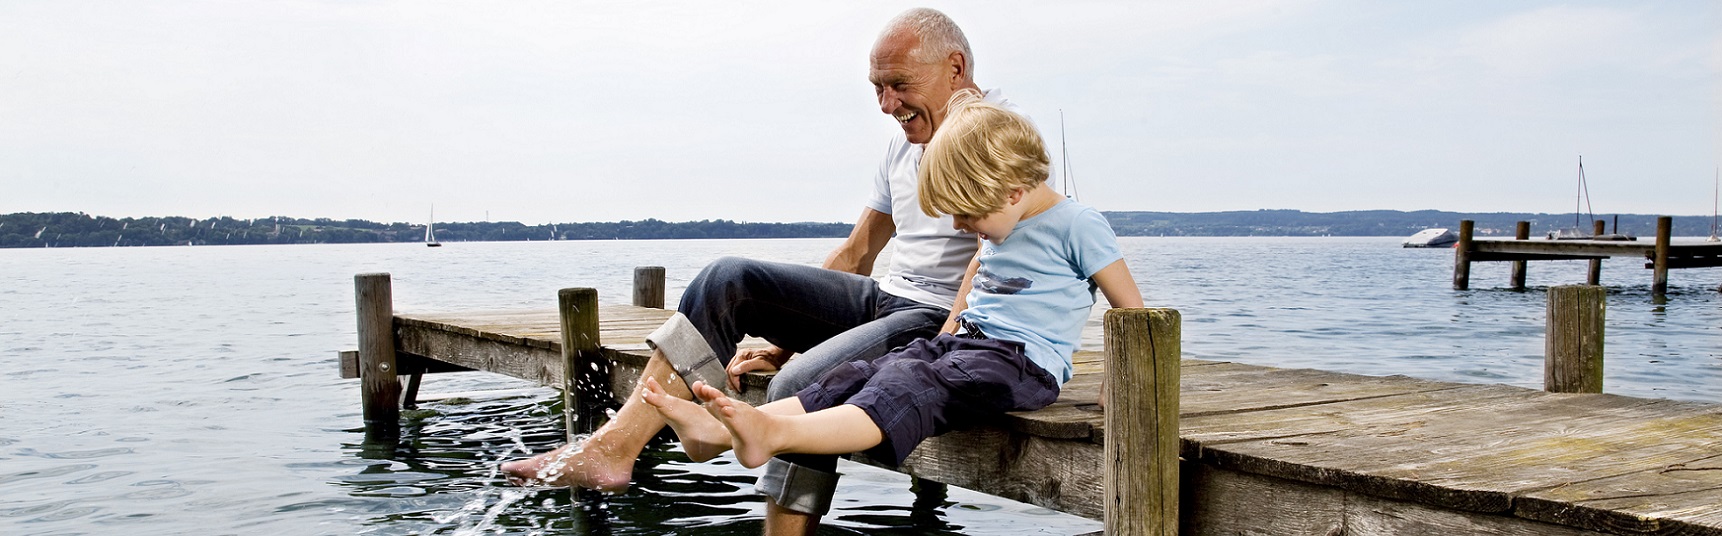 Grandfather and child on a pier